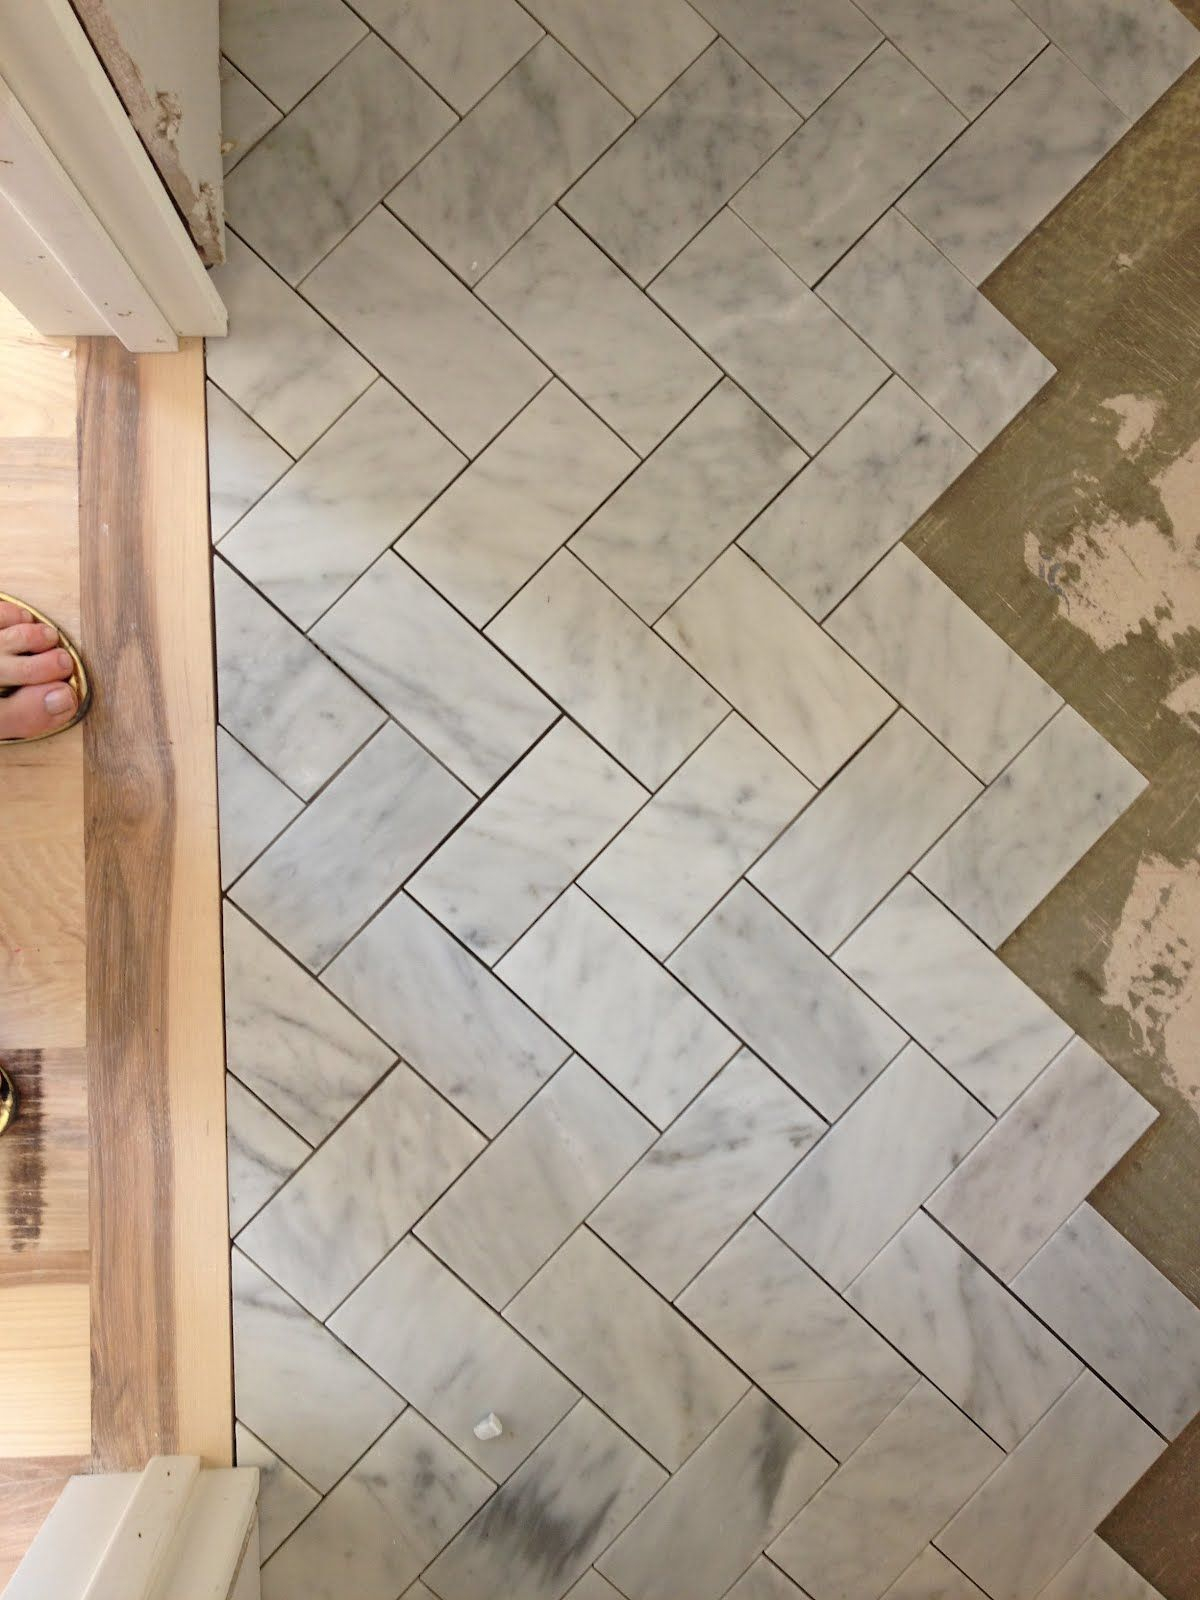 Subway Tile In A Herringbone Pattern On The Floor Or within proportions 1200 X 1600